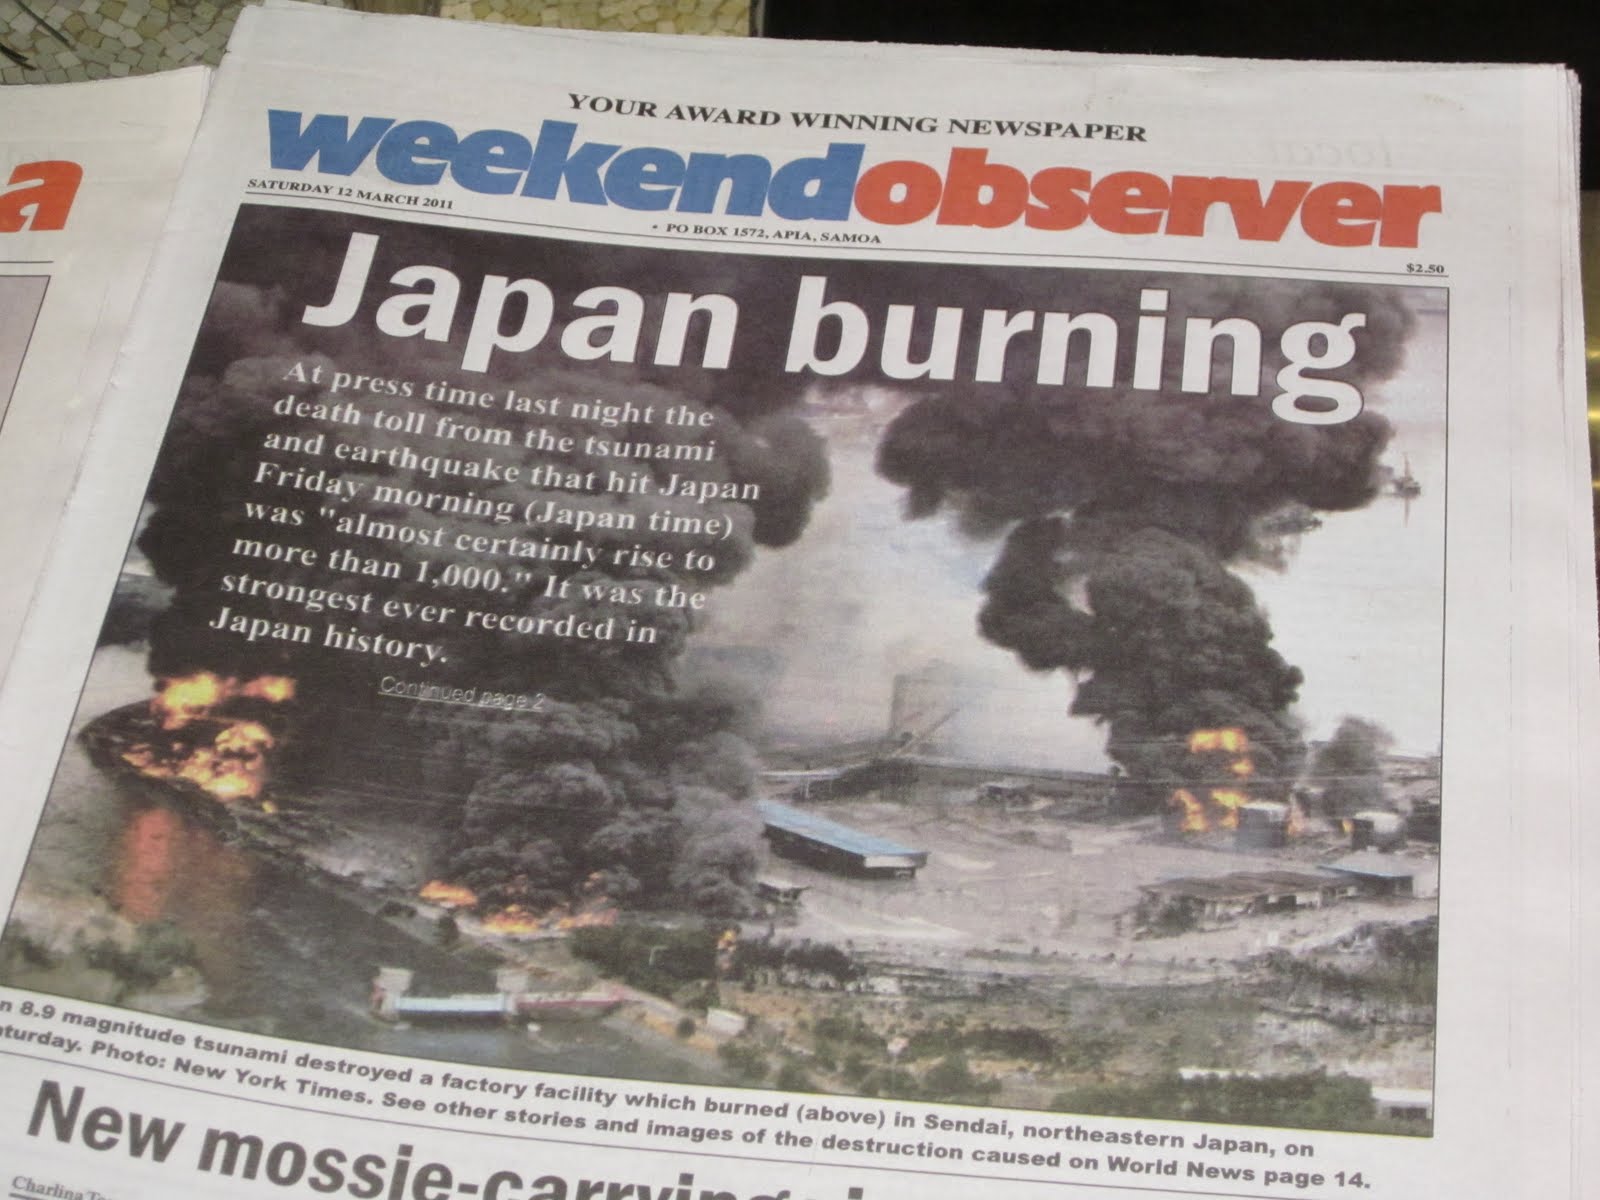 Words from the South Pacific: Japan’s Tragedy